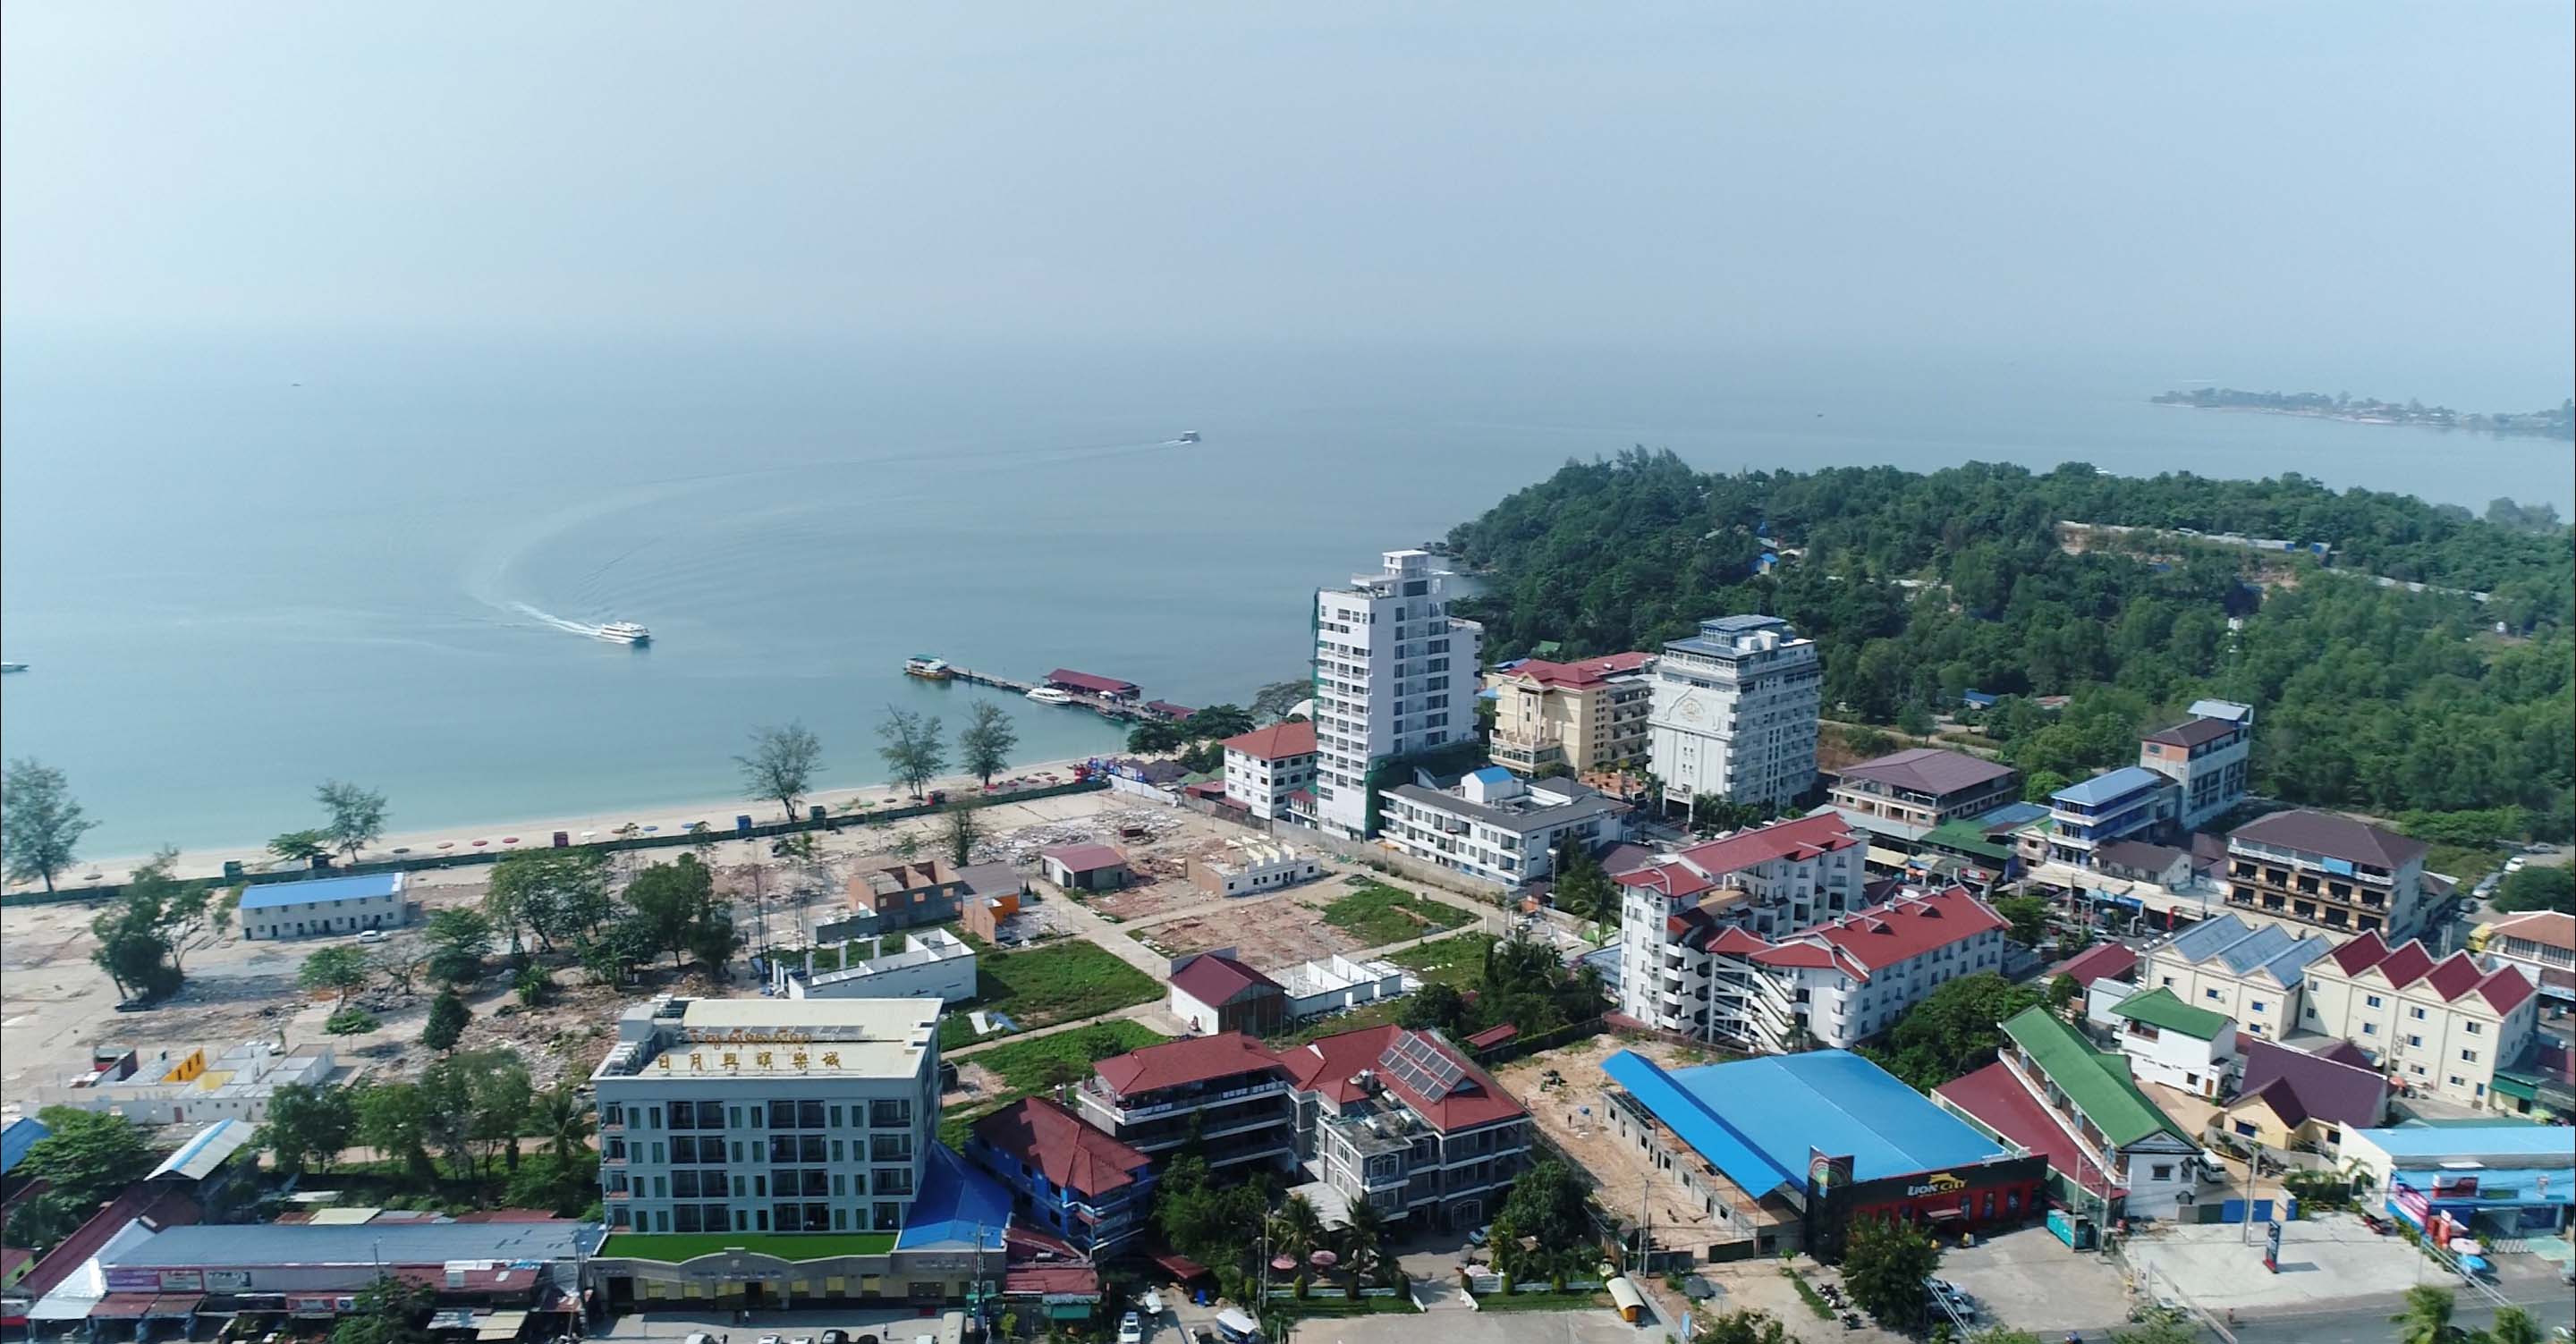 Sihanoukville: The building boom continues